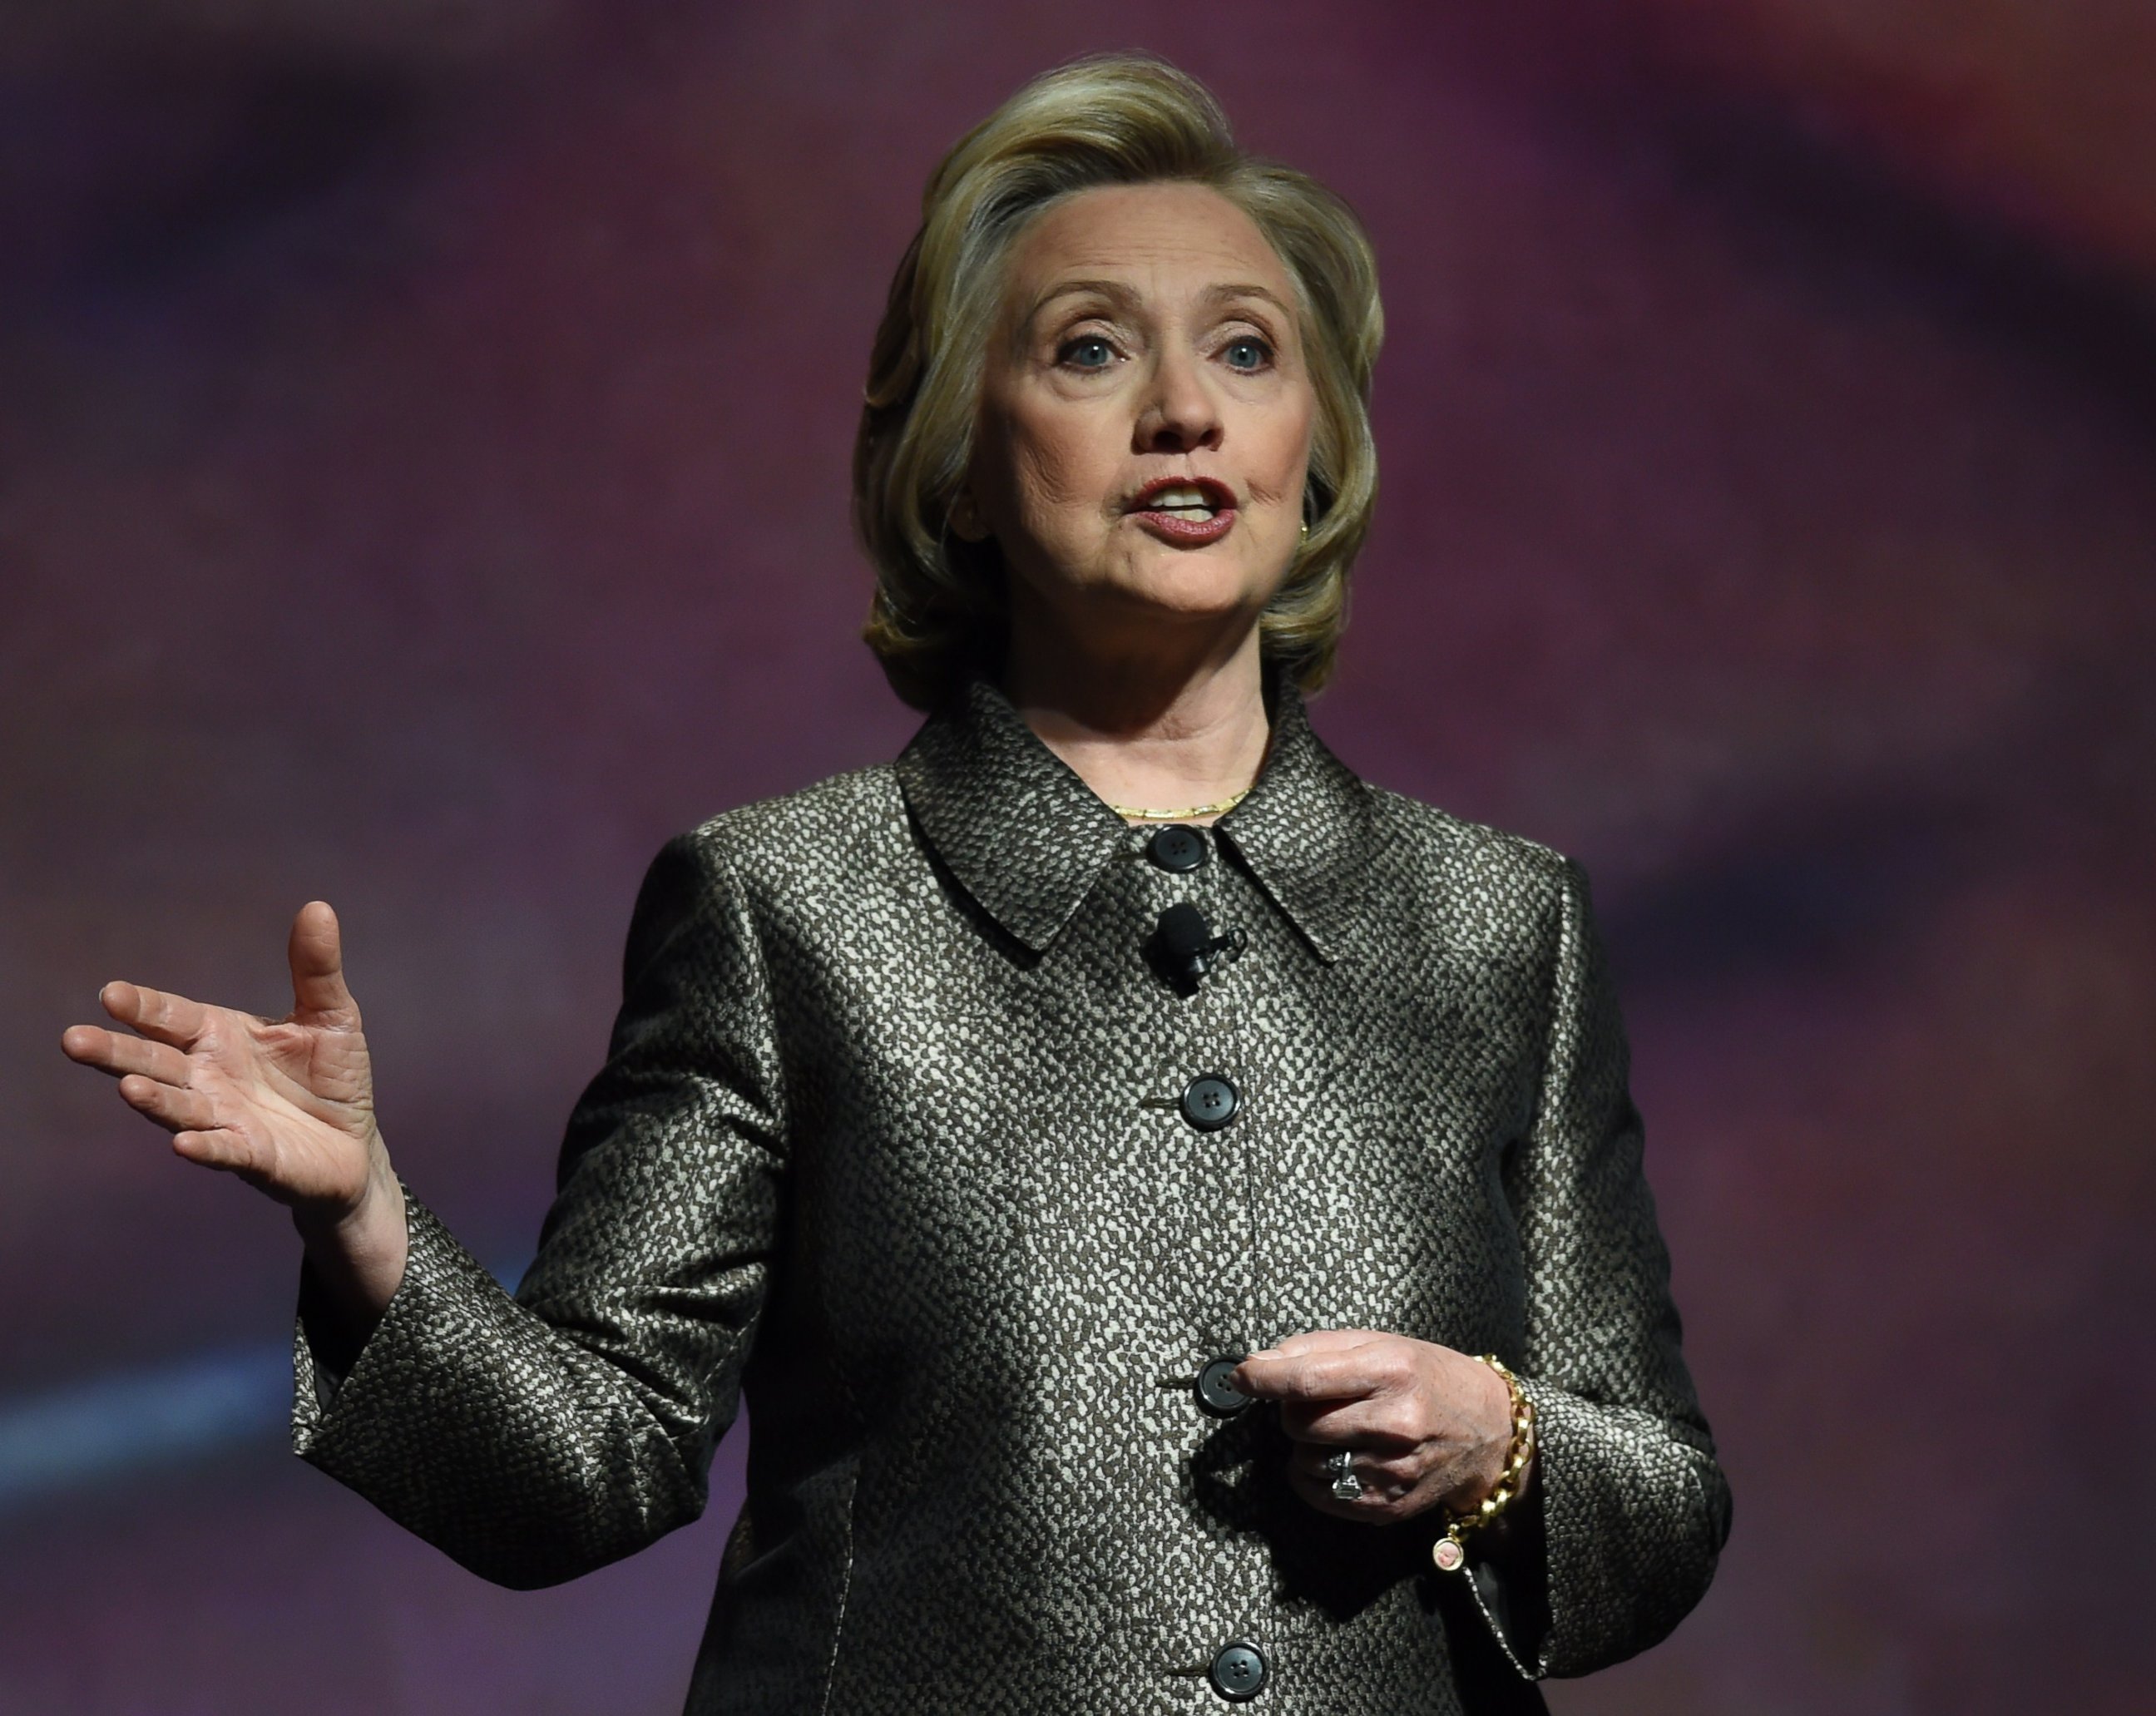 PHOTO: Hillary Clinton speaks at a women's equality event, March 9, 2015 in New York. 